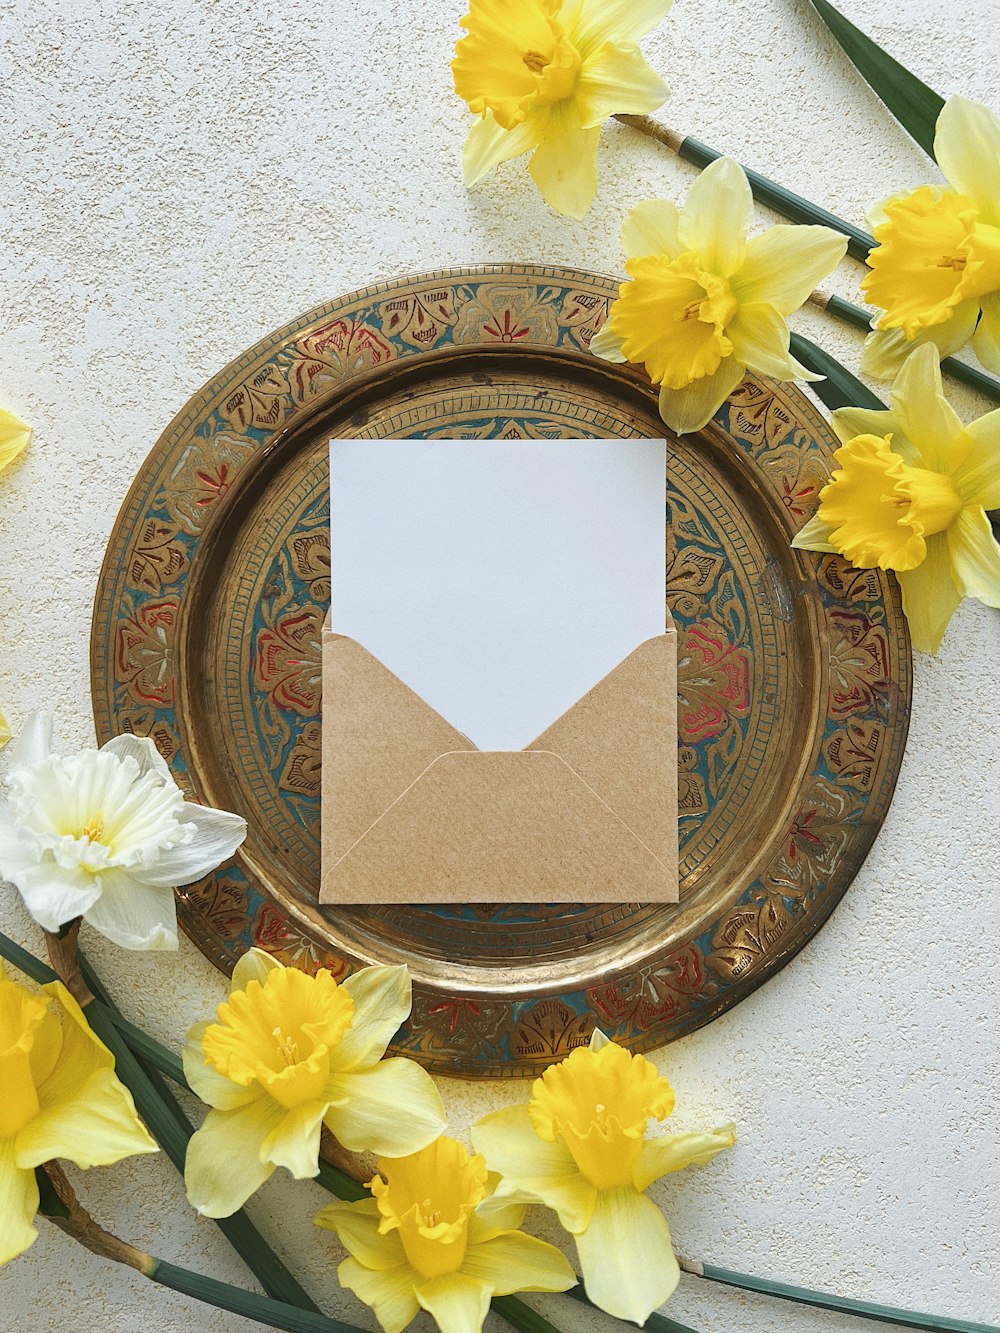 a brown envelope sitting on top of a plate next to yellow flowers